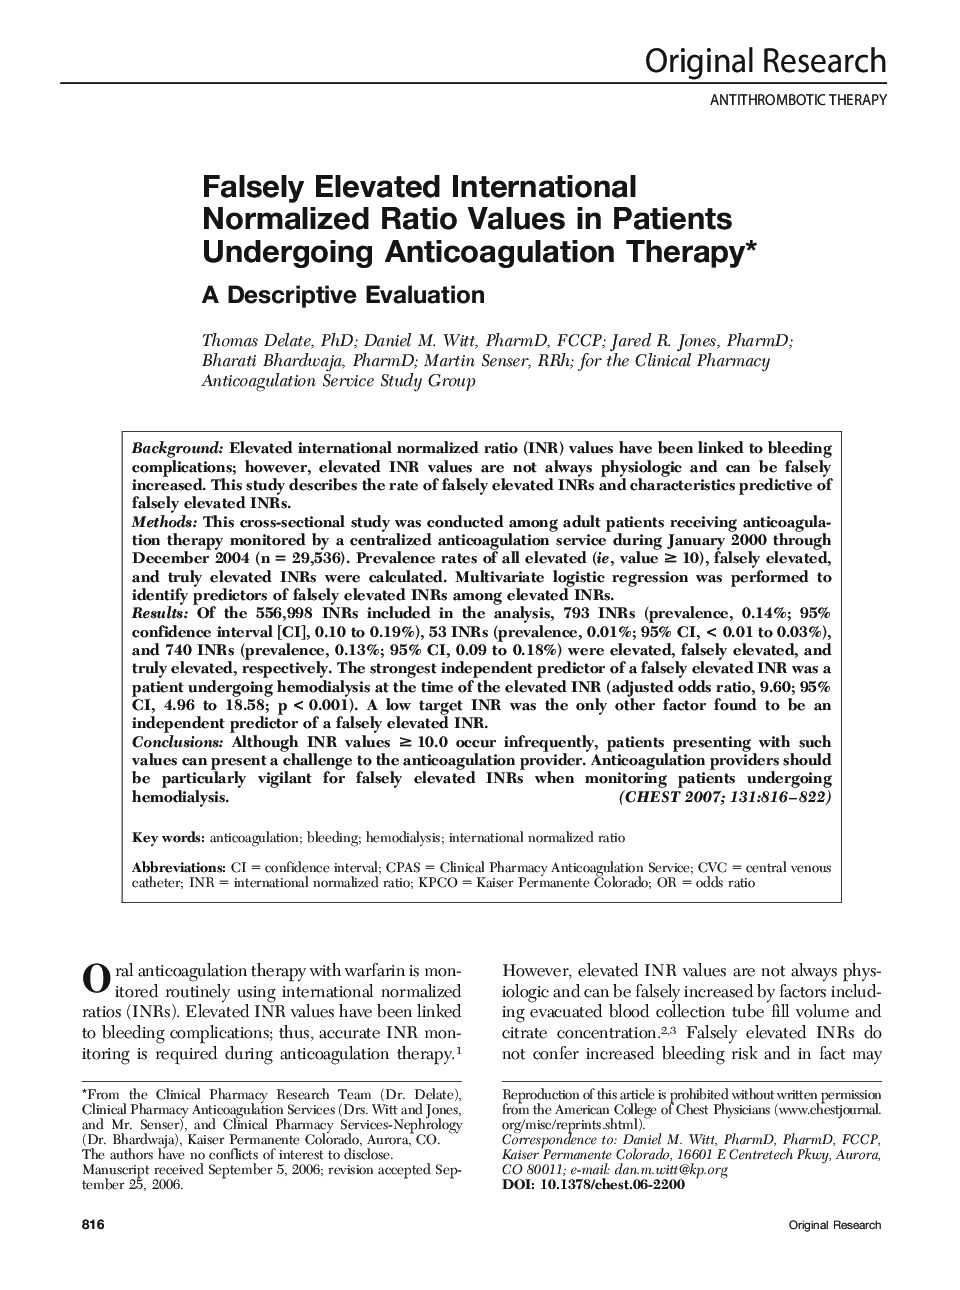 Falsely Elevated International Normalized Ratio Values in Patients Undergoing Anticoagulation Therapy : A Descriptive Evaluation